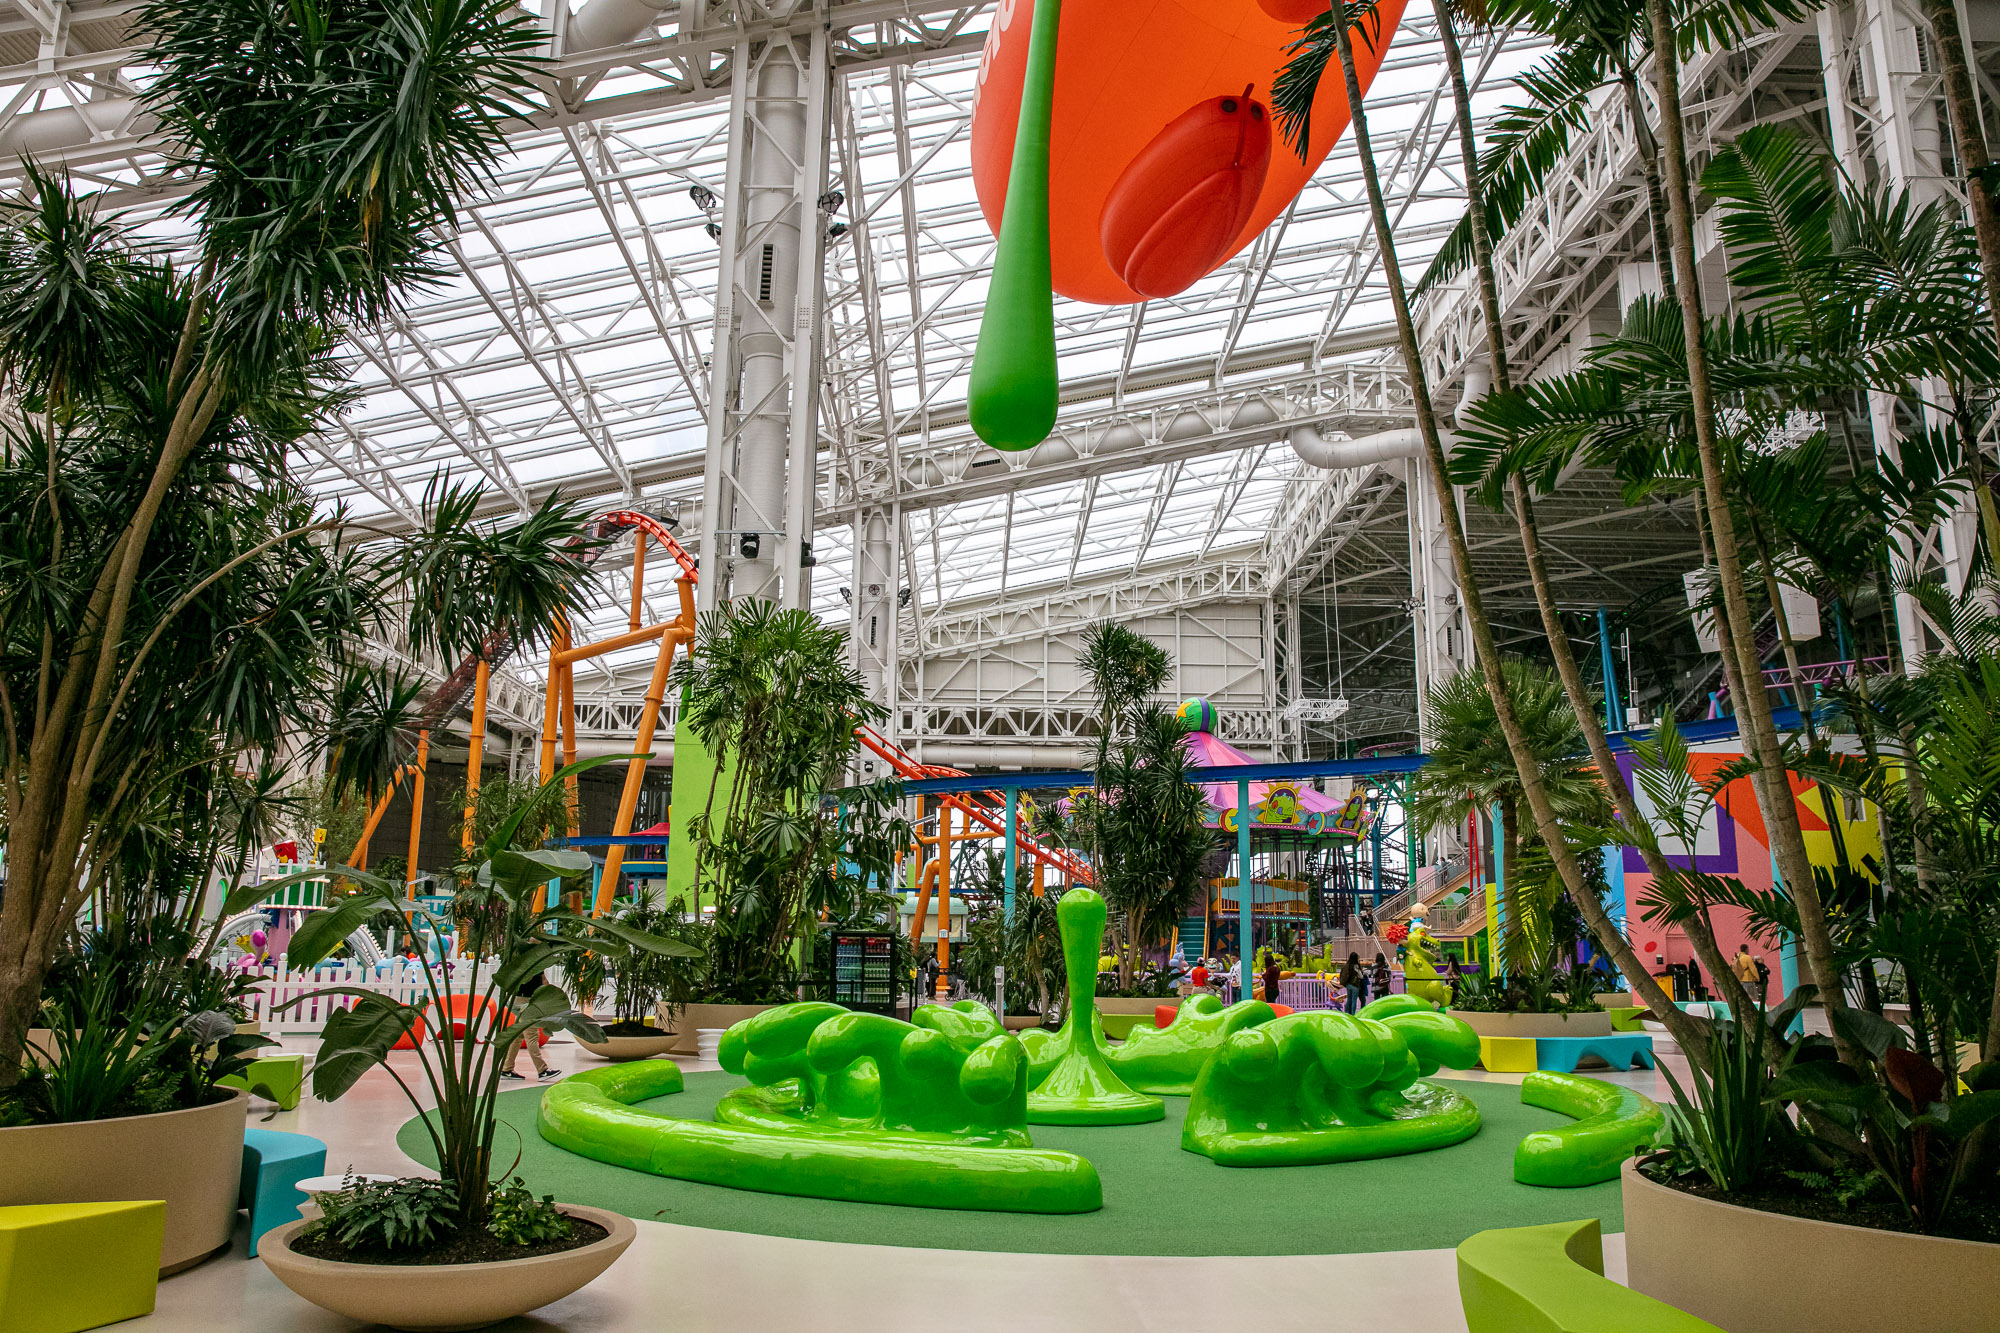 American Dream, 2nd largest mall in US, opens in New Jersey, along with  Nickelodeon Universe Theme Park - 6abc Philadelphia